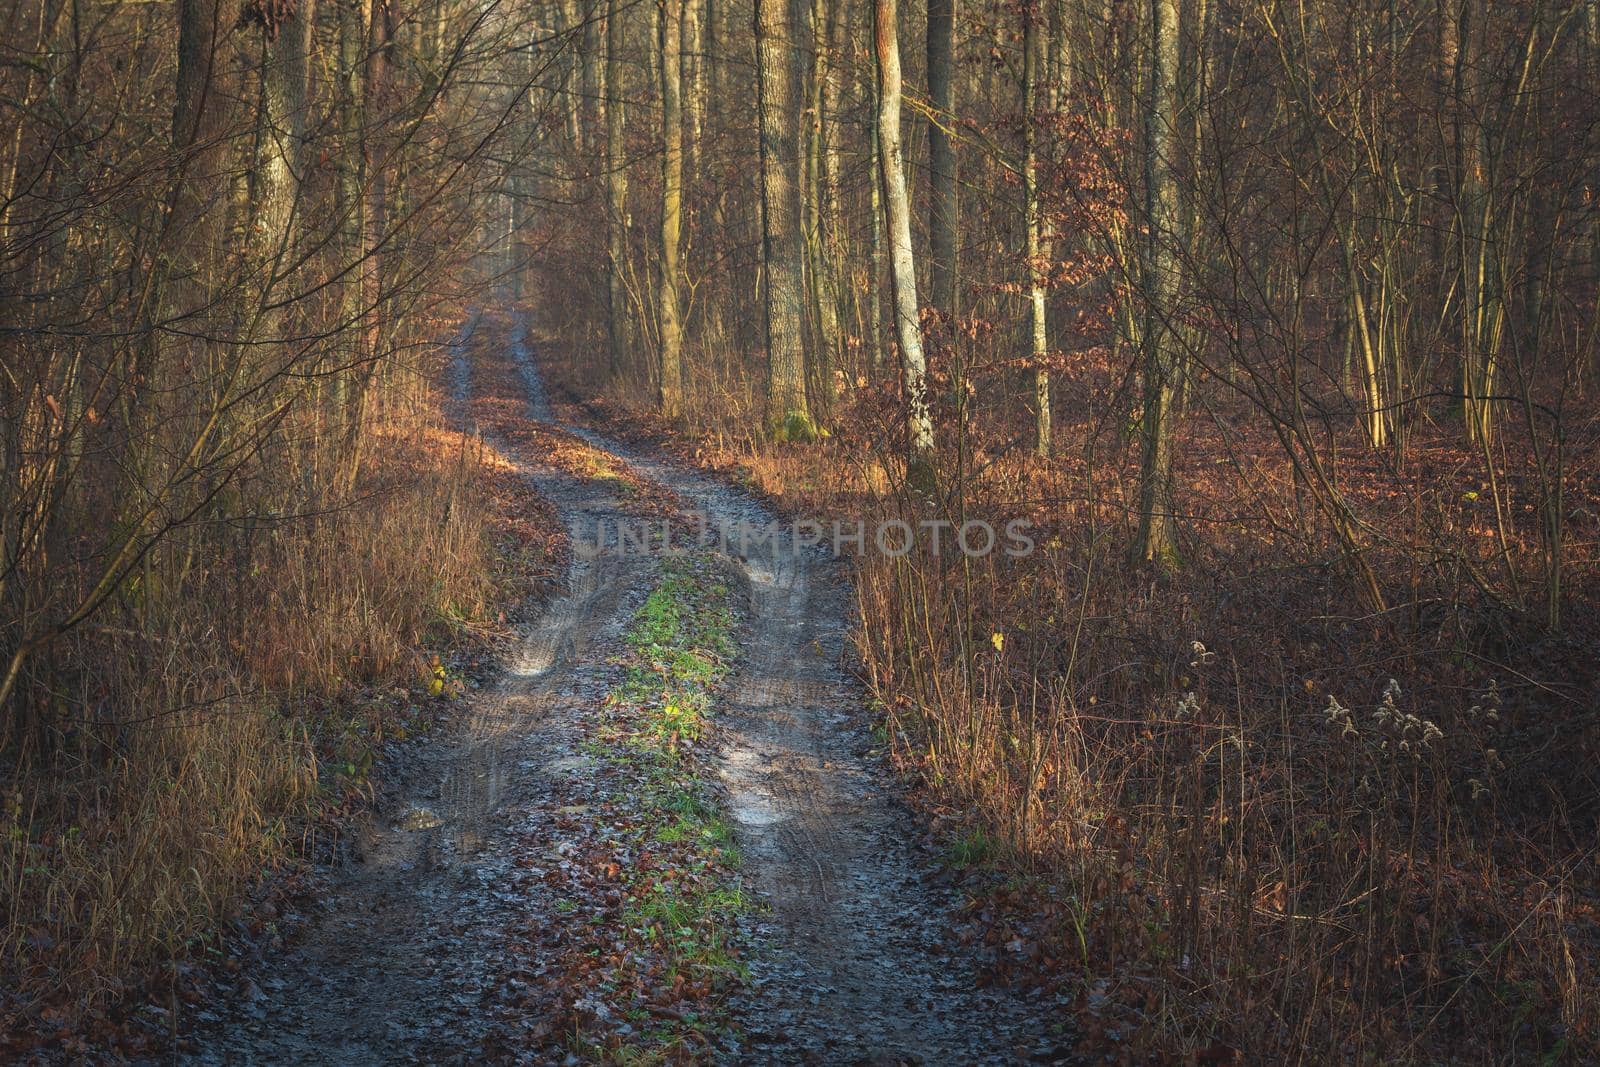 Dirt road through the brown forest by darekb22